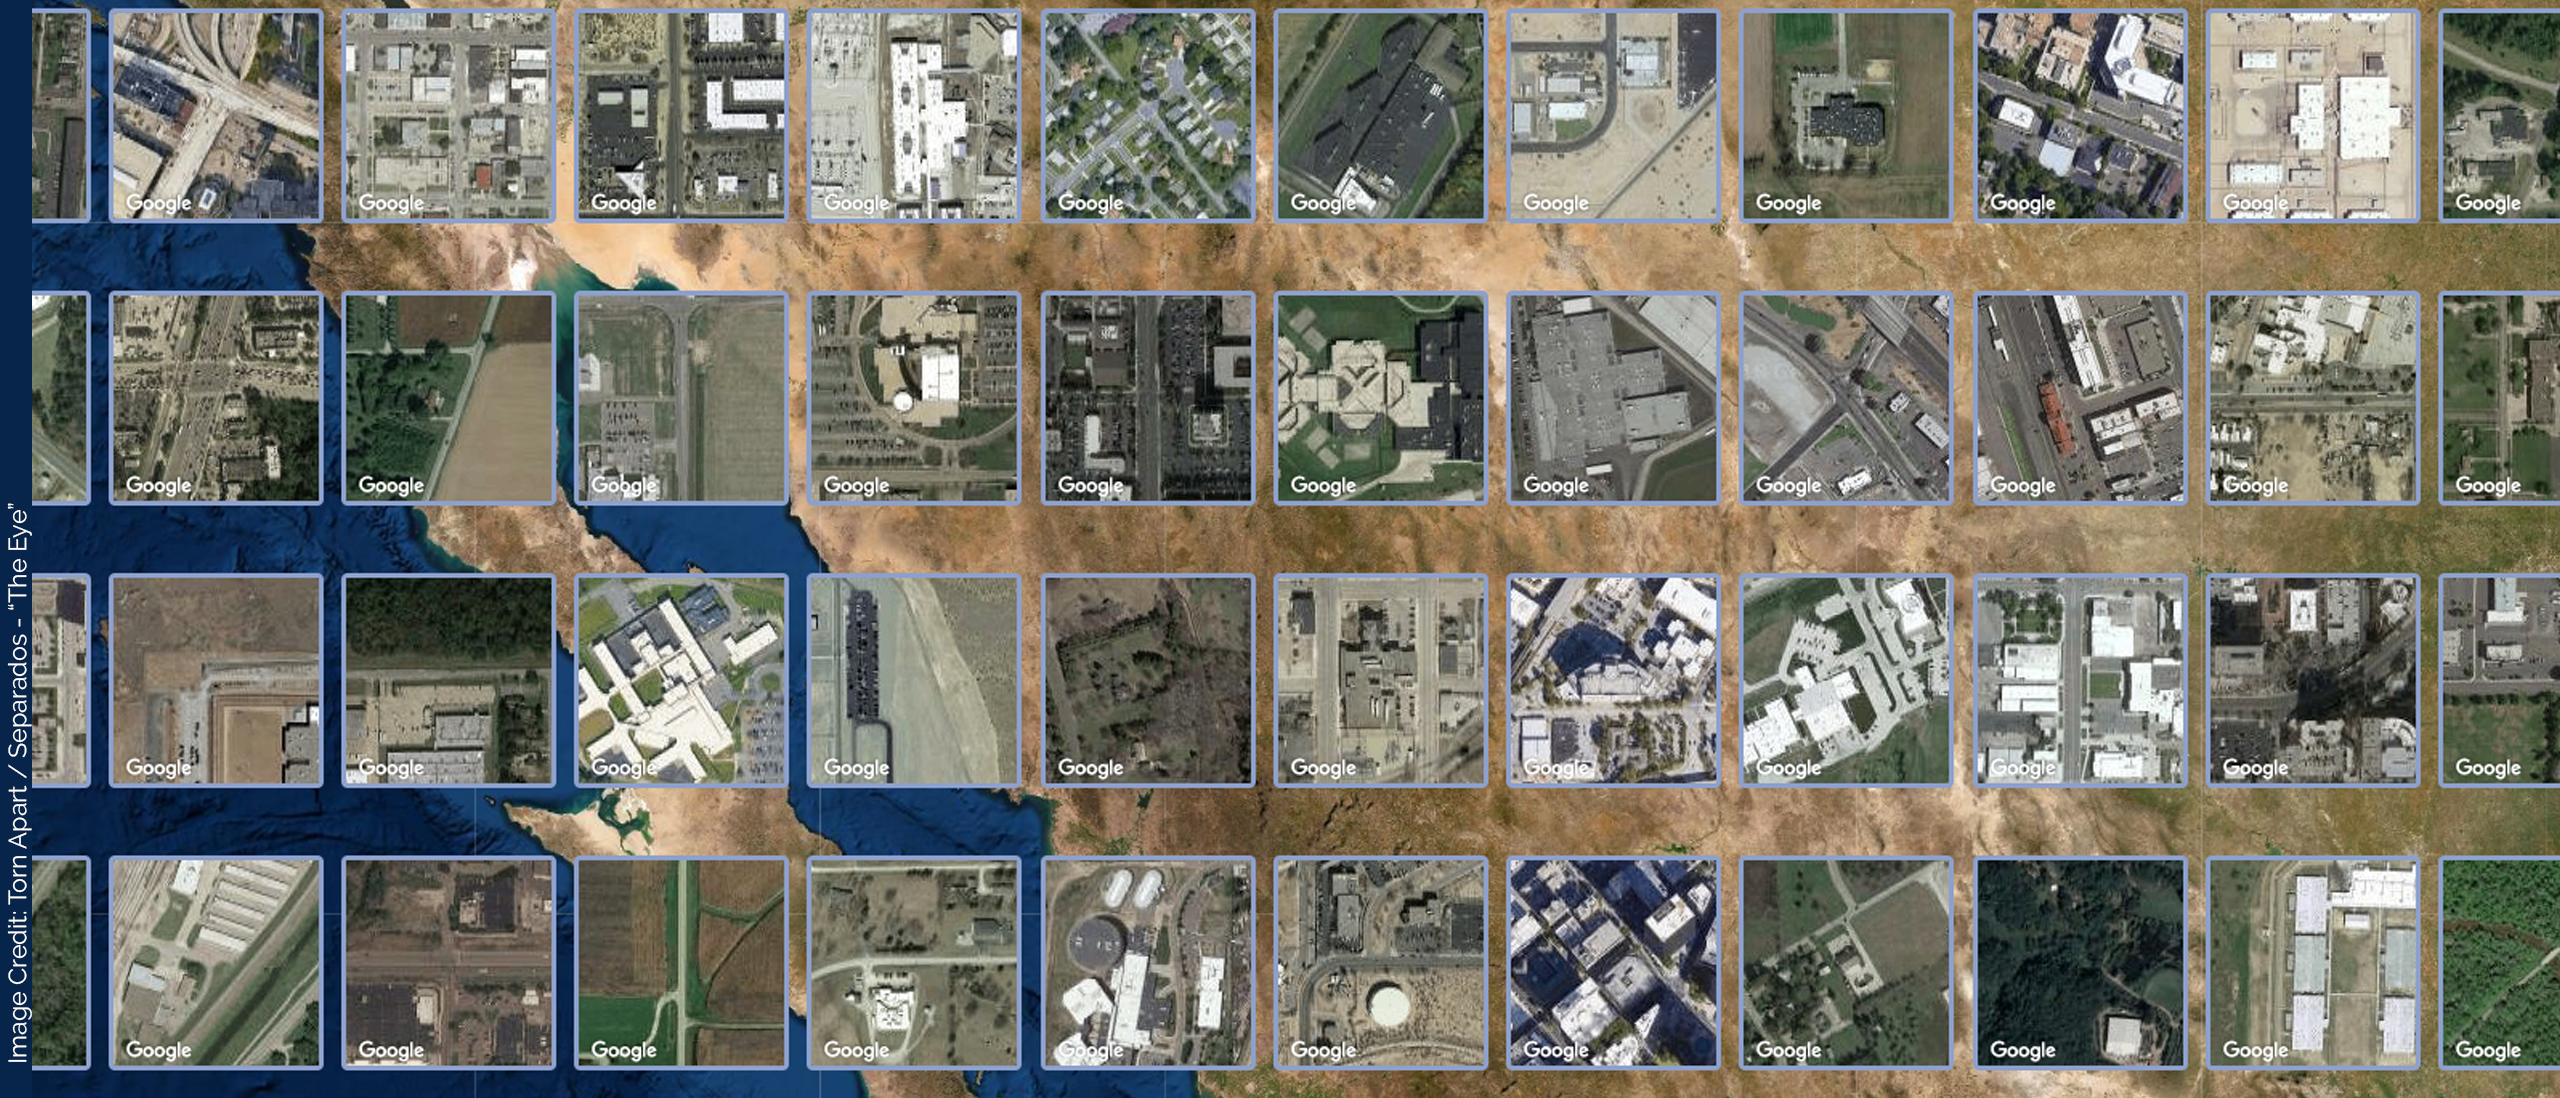 Data visualization comprised of grid thumbnails of locations on google maps. Image taken from Torn Apart / Separados - The Eye